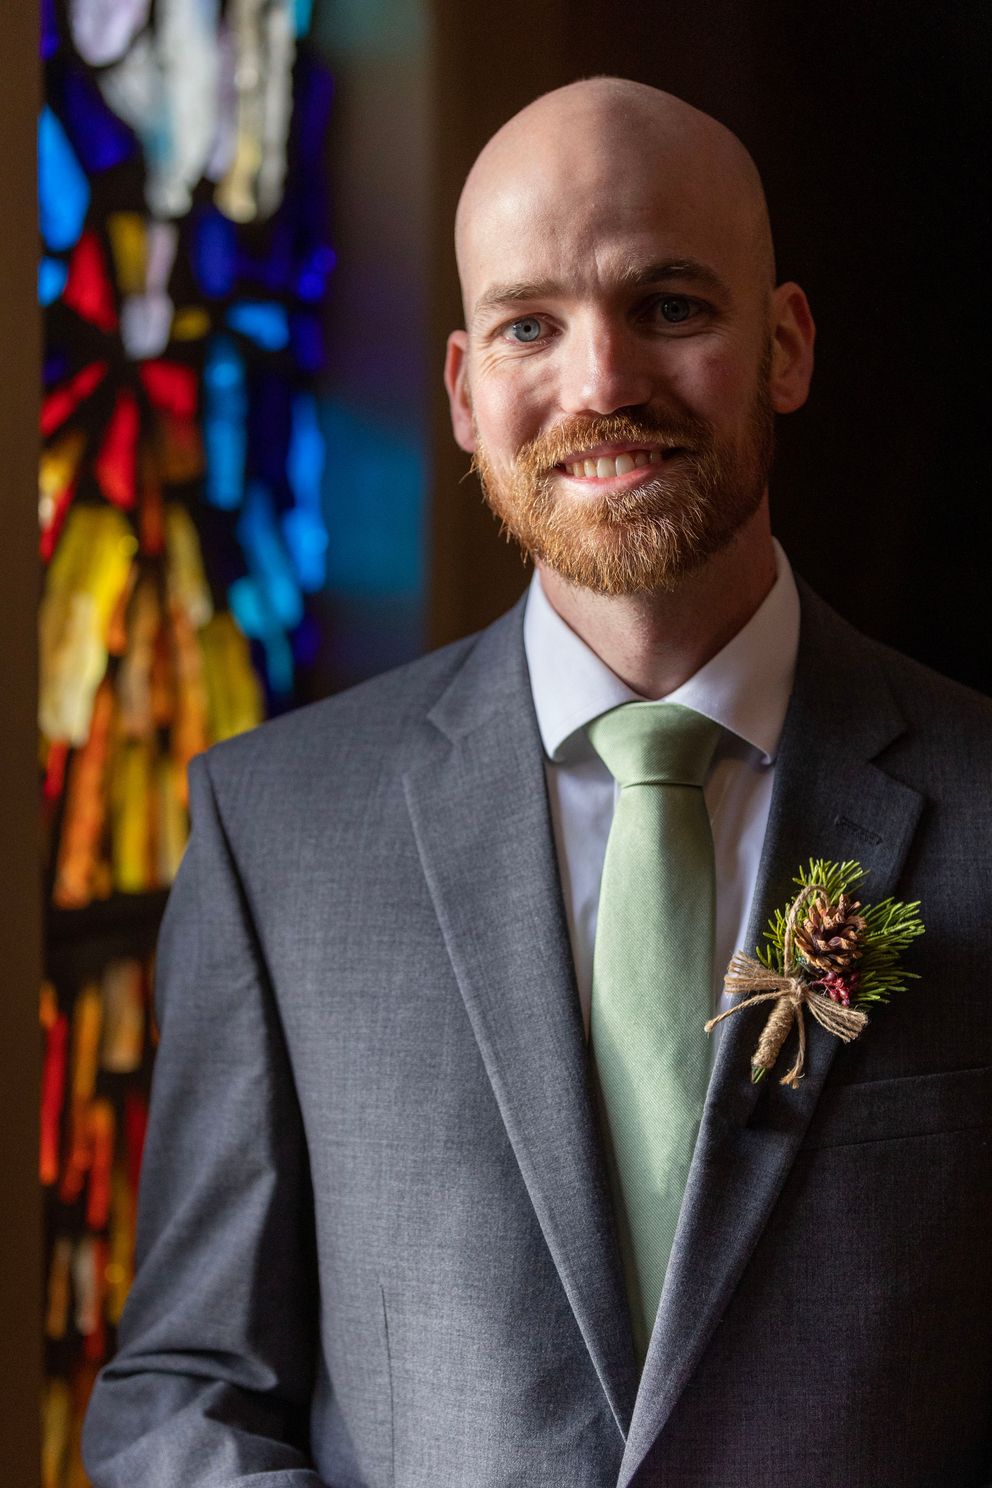 Groom standing next to the stain glass in the church in Napa. Photographed in natural light.